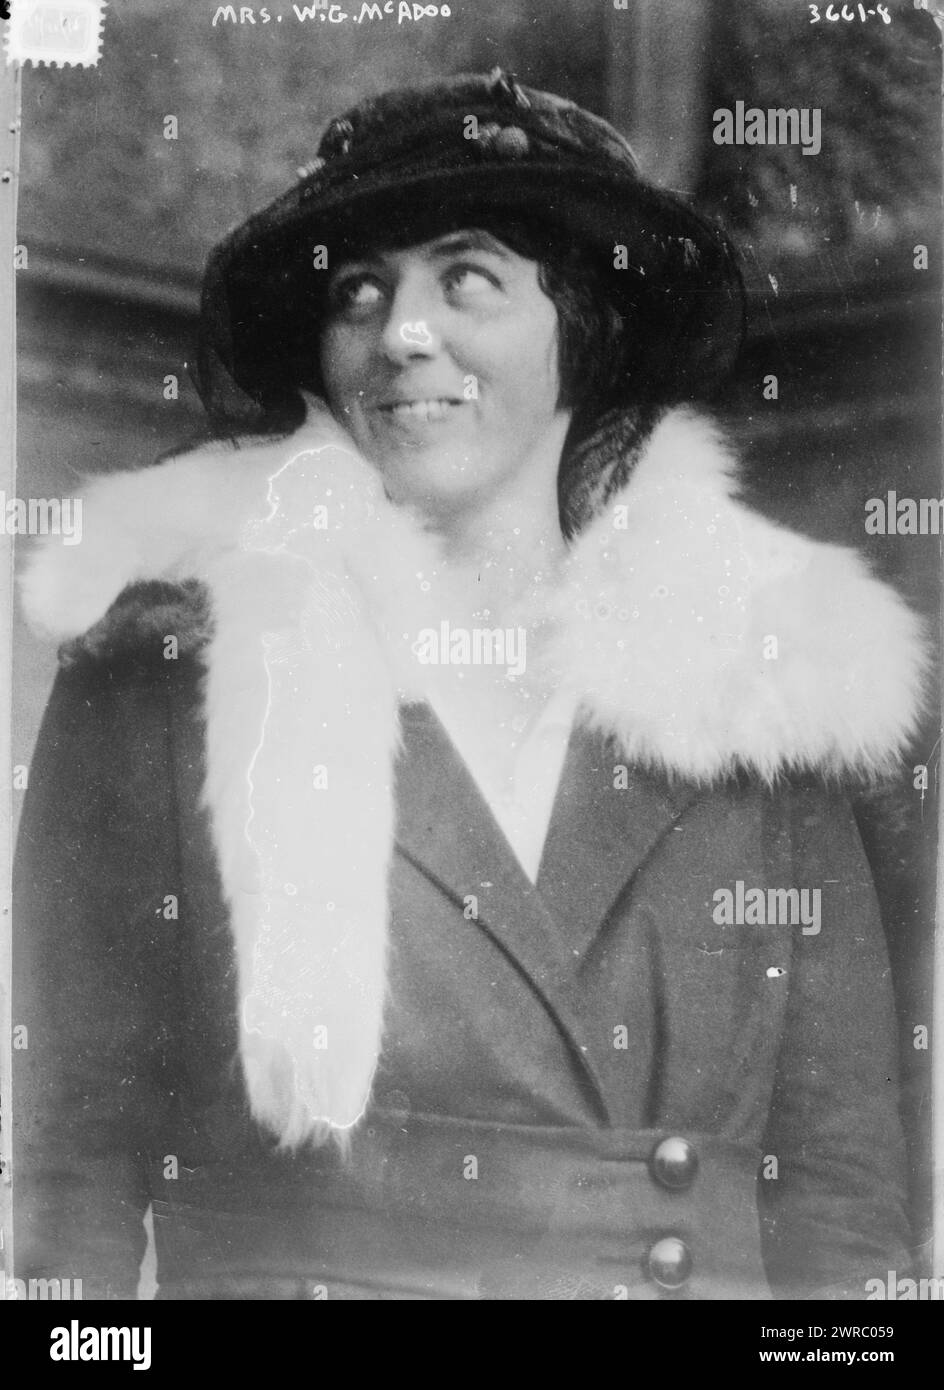 Mrs. W.G. McAdoo, Photograph shows President Woodrow Wilson's daughter Eleanor Randolph Wilson McAdoo (1889-1967) who married William Gibbs McAdoo (1863-1941), who served as Secretary of the Treasury in President Woodrow Wilson's cabinet from 1913 to 1918., between ca. 1910 and ca. 1915, Glass negatives, 1 negative: glass Stock Photo